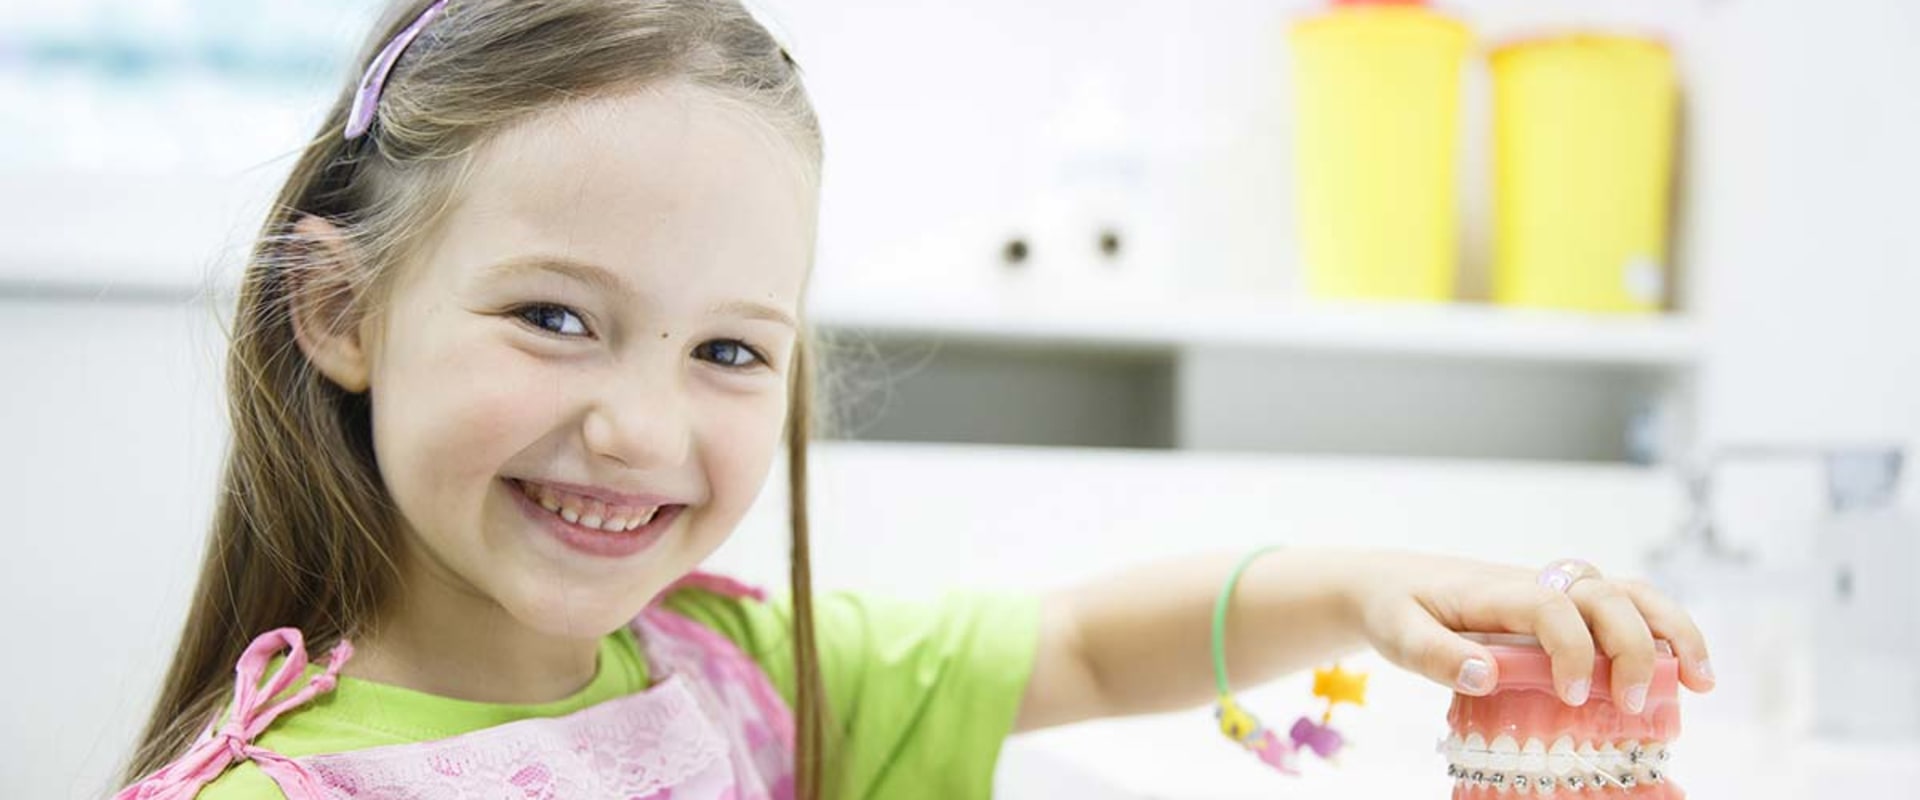 The Importance of Early Orthodontic Care for Children